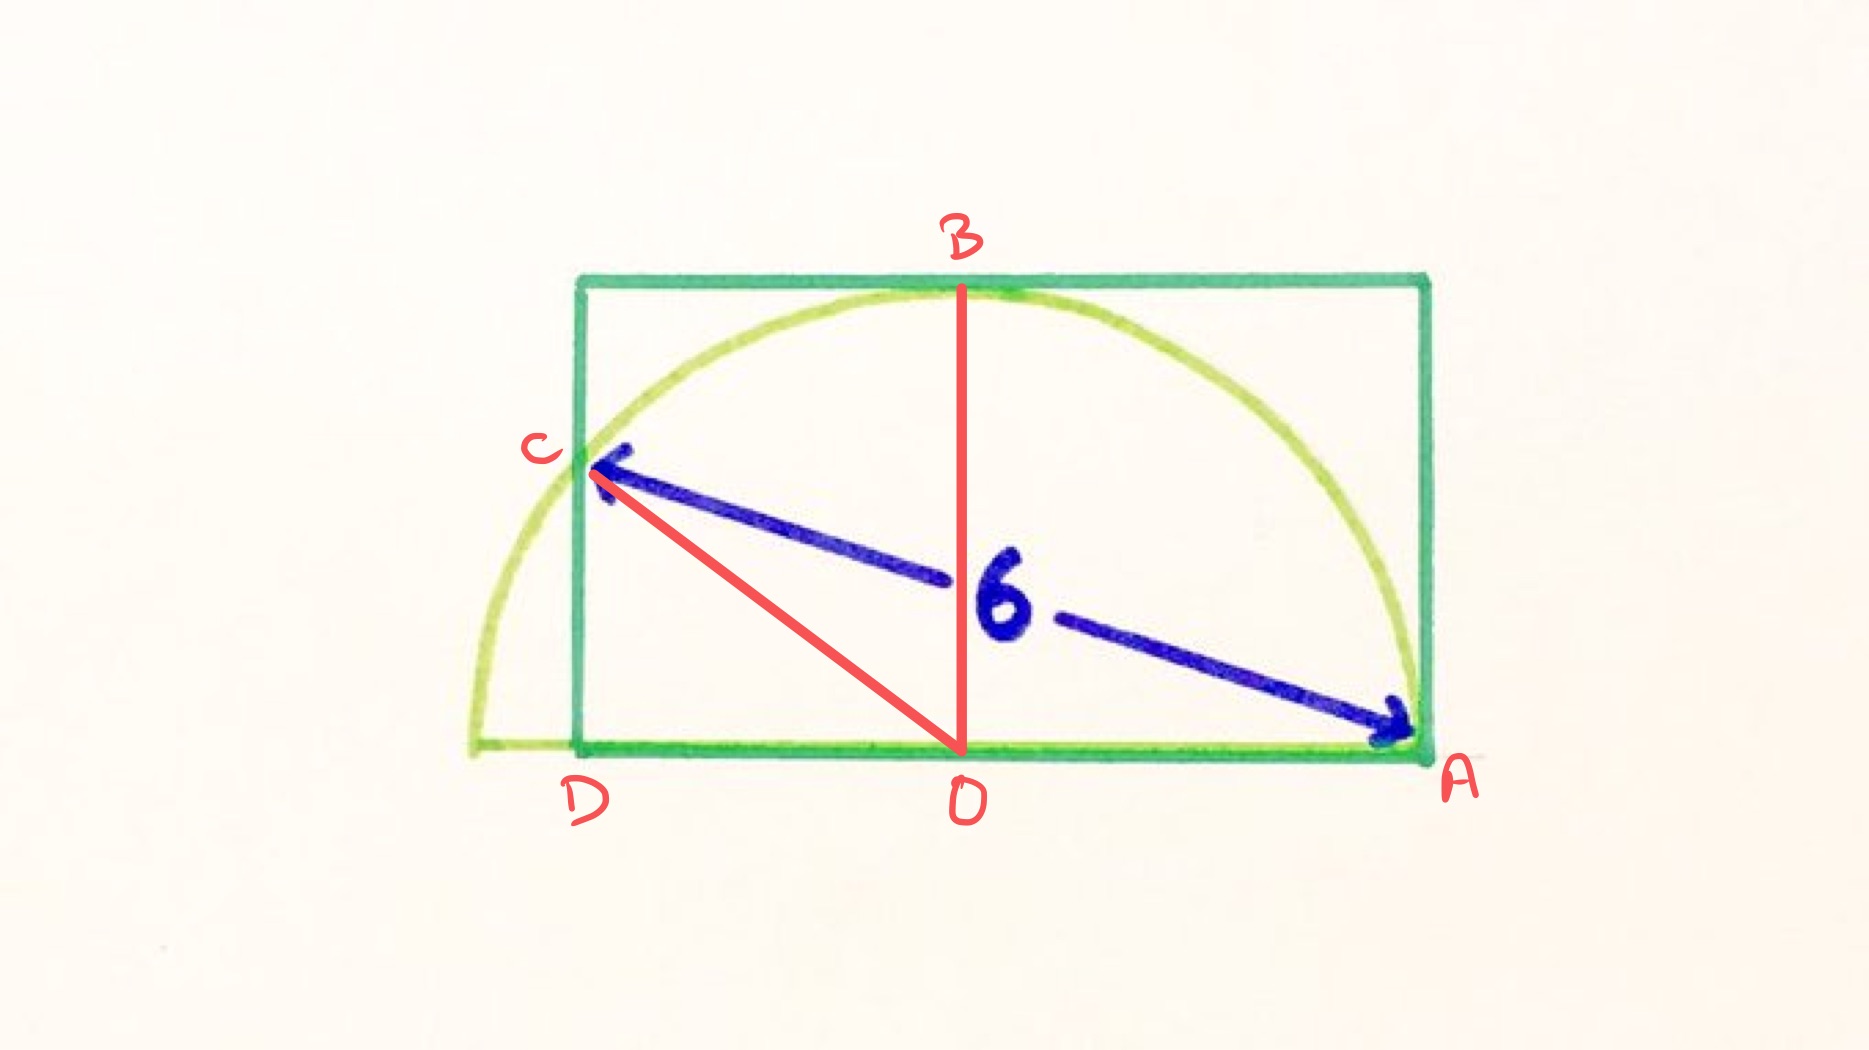 Overlapping rectangle and semi-circle labelled